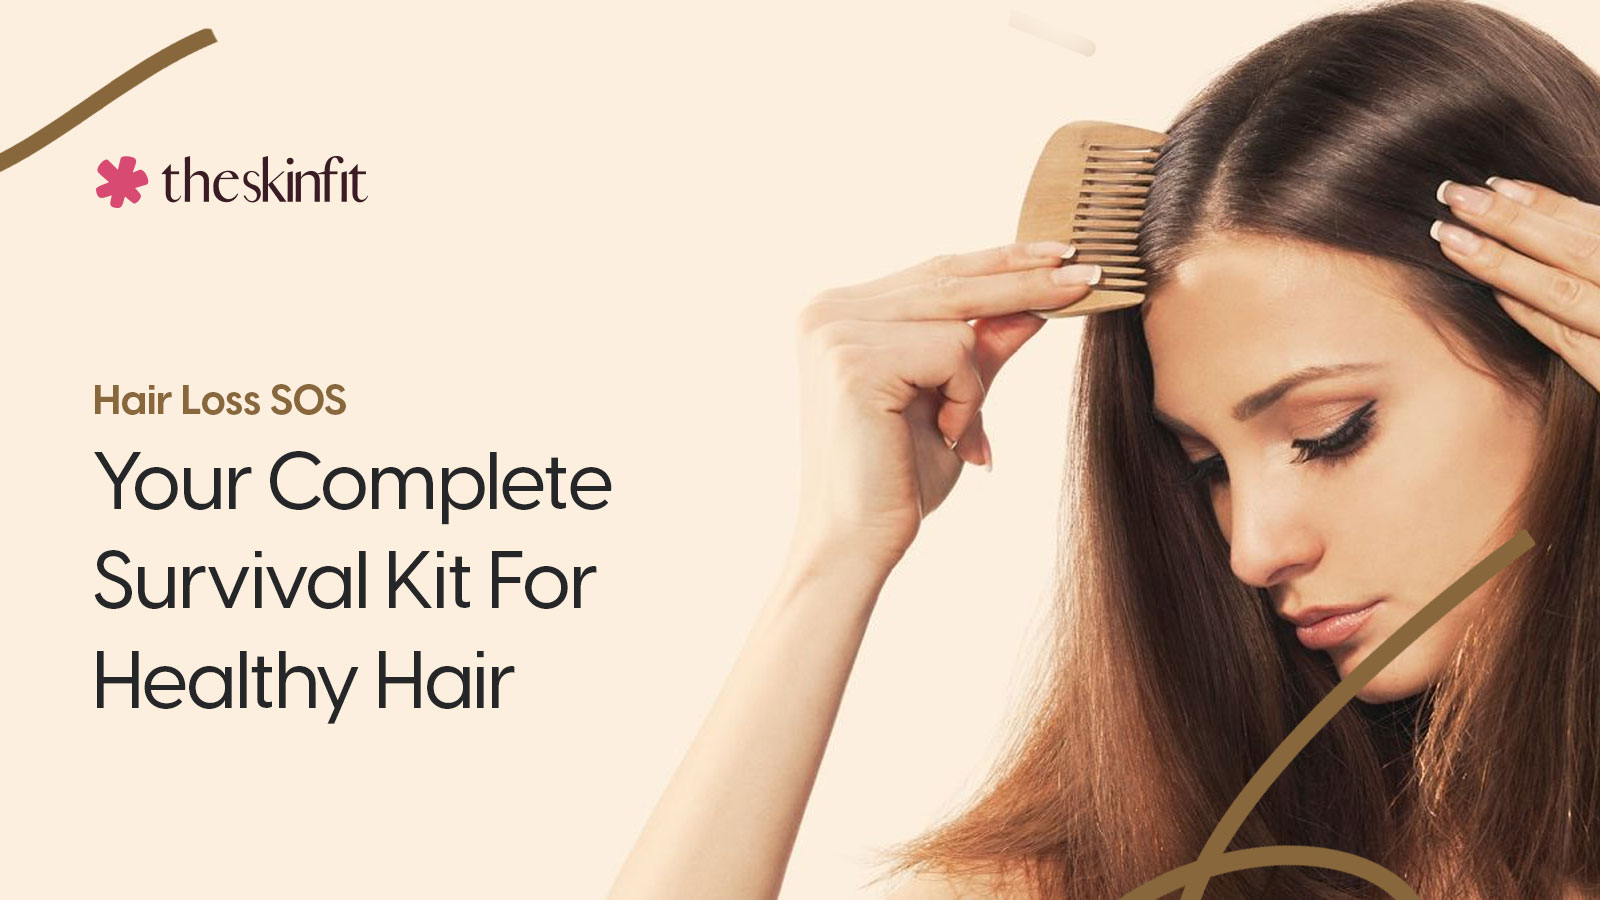 Hair Loss SOS: Your Complete Survival Kit For Healthy Hair